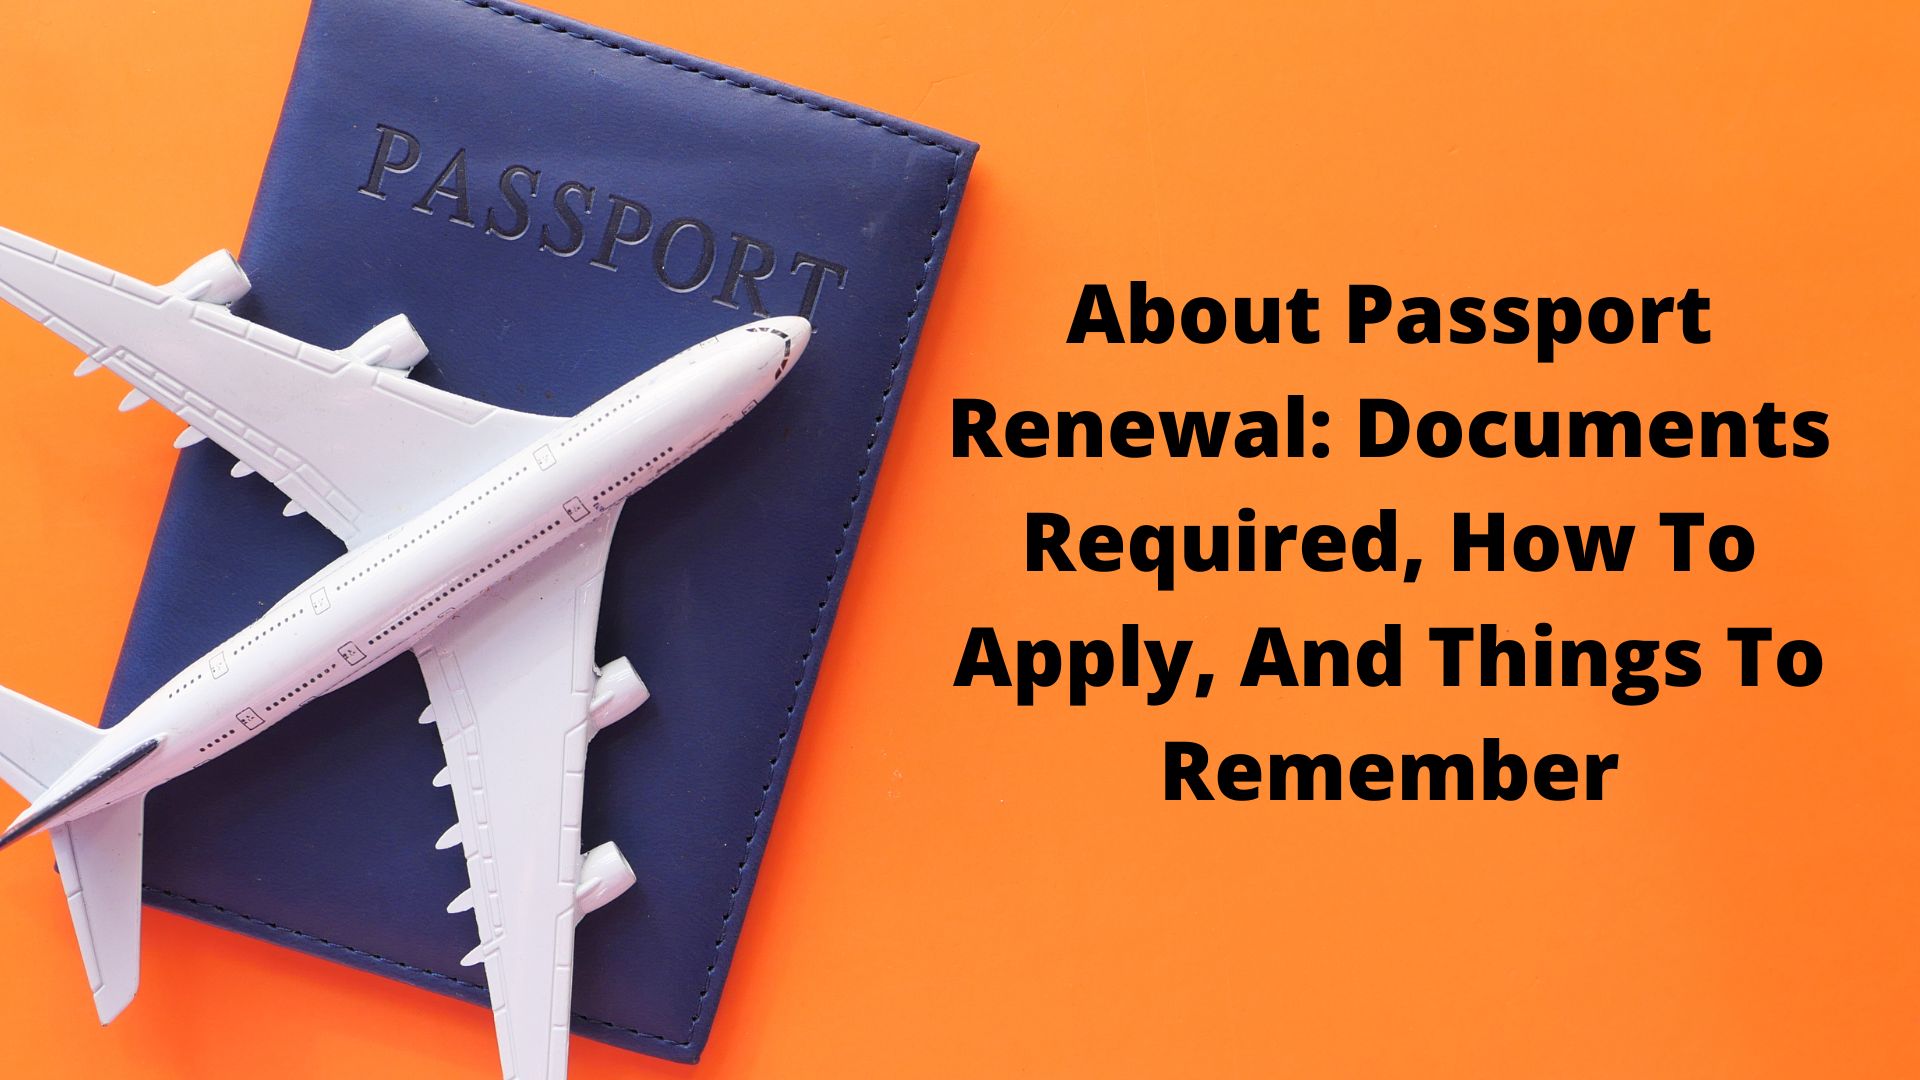 About Passport Renewal: Documents Required, How To Apply, And Things To Remember